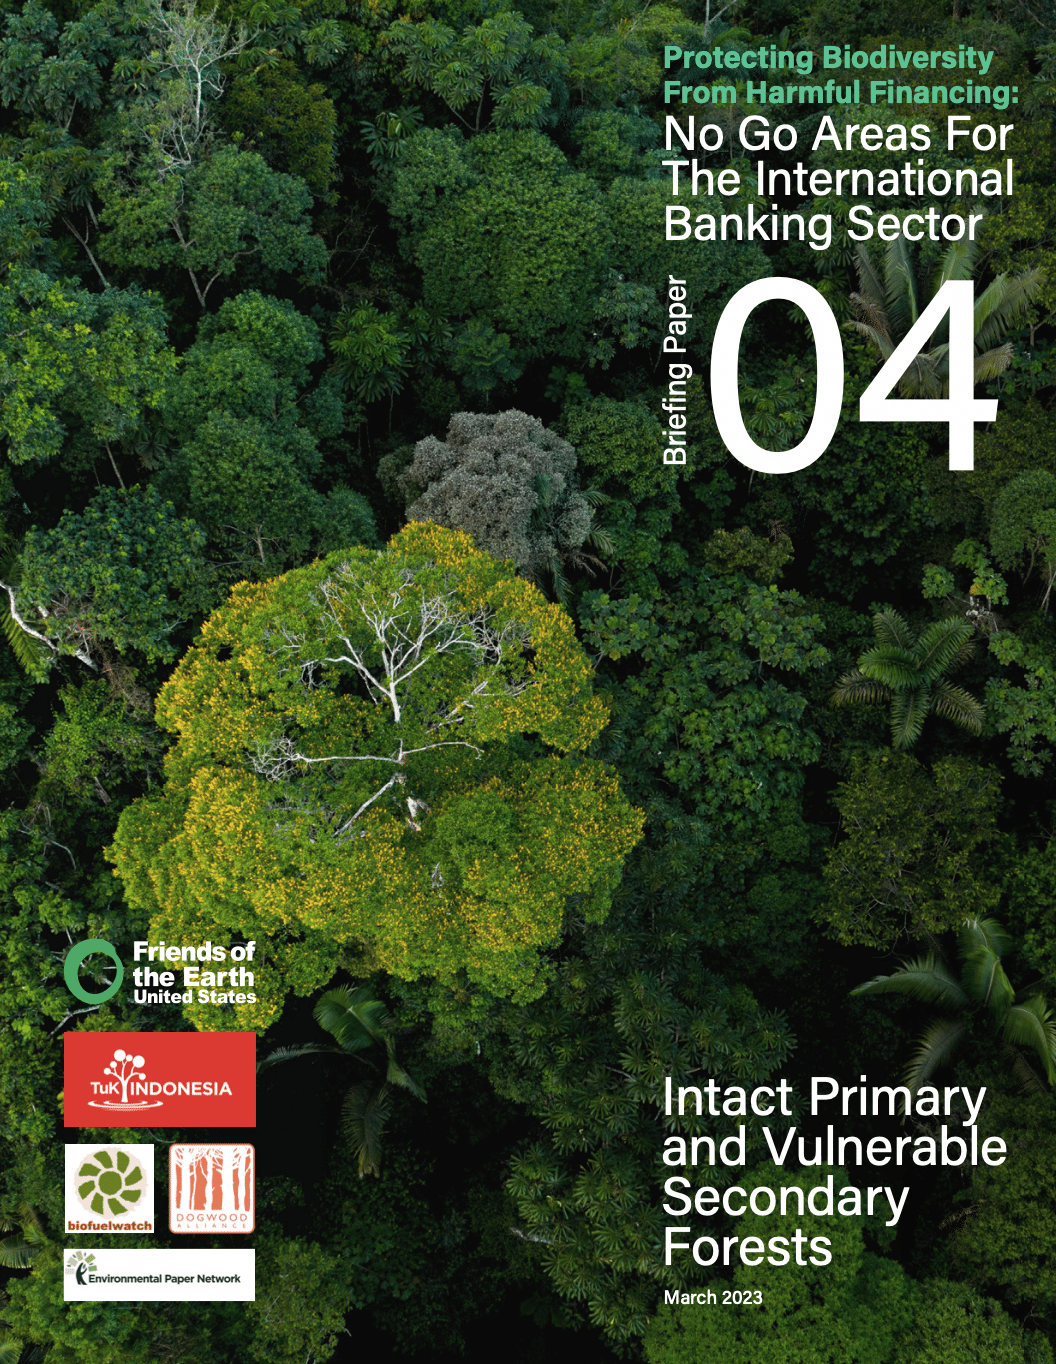 On International Forests Day, new briefing paper urges banks and financiers to exclude harmful financing that negatively impacts primary and vulnerable secondary forests